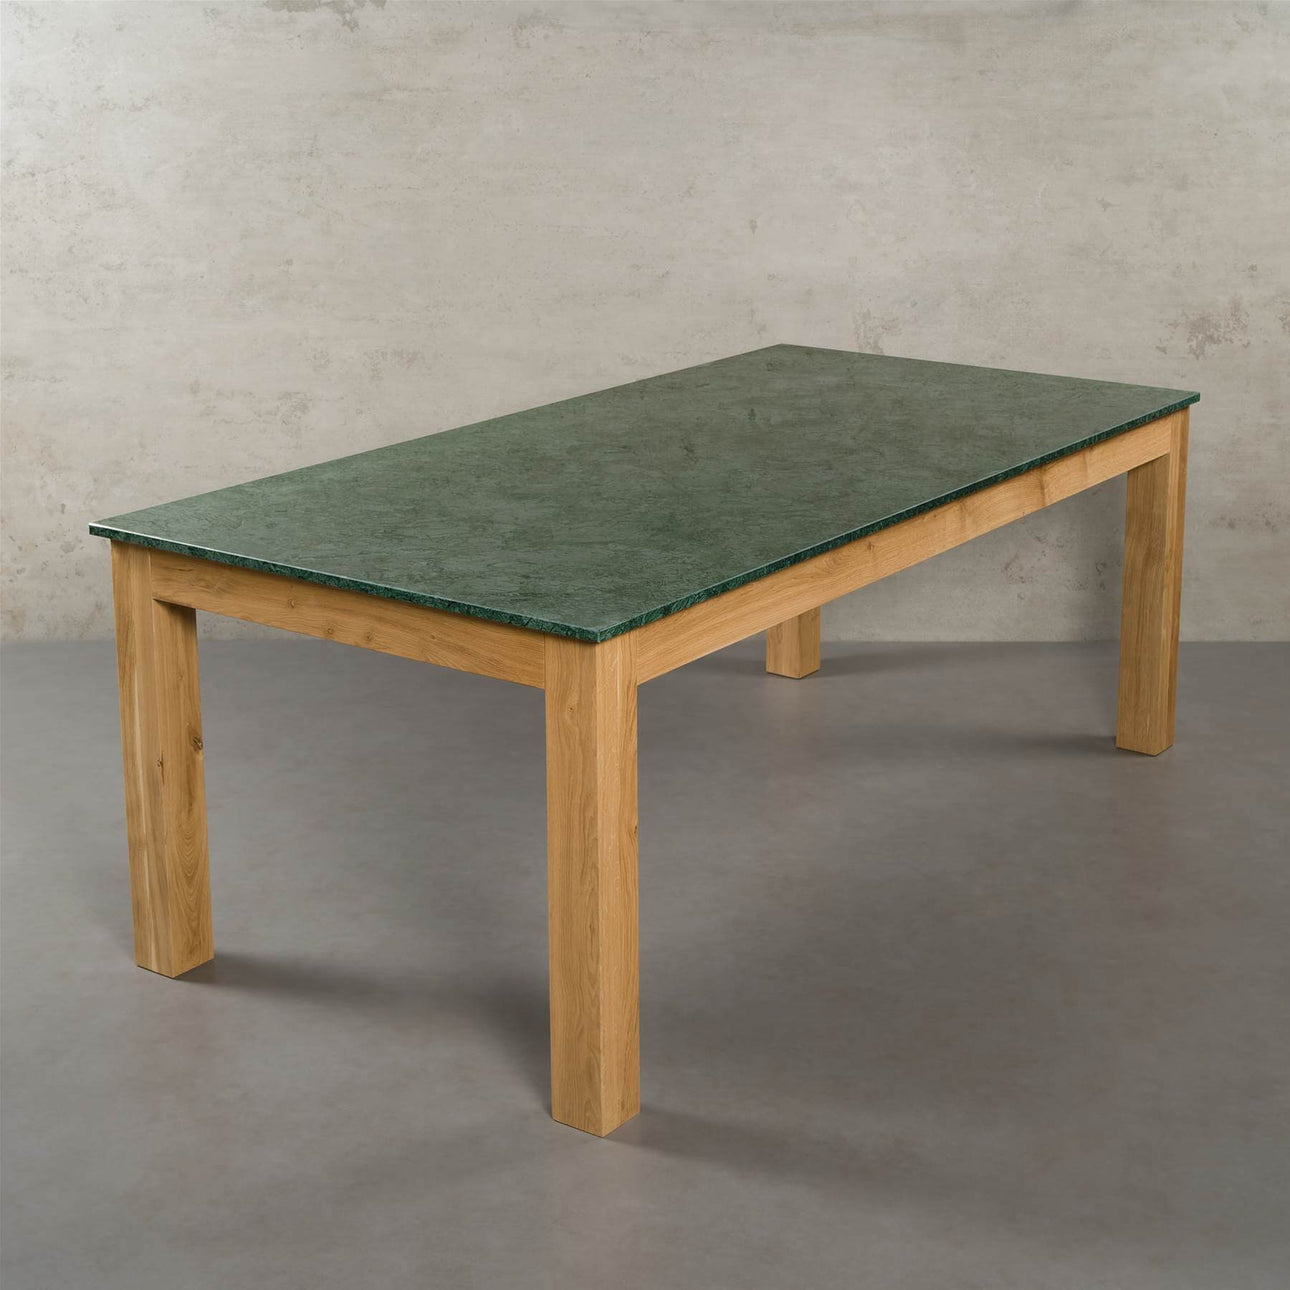 Valencia marble dining table